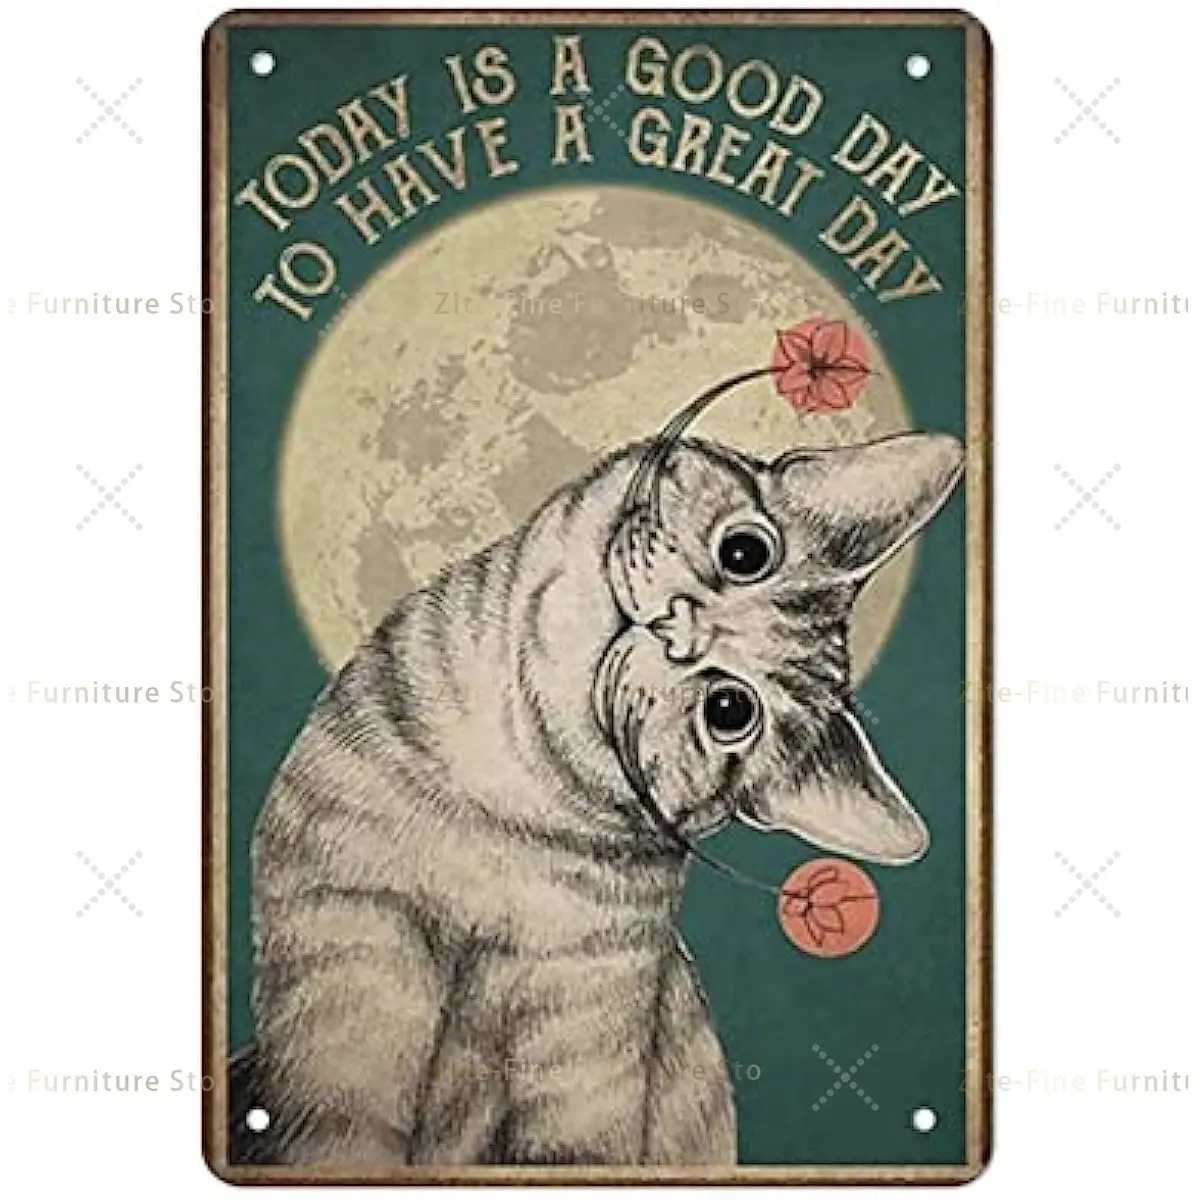 

Vintage Metal Tin Sign Cat Retro Tin Decorative Sign Wall Decor - Today Is A Good Day to Have A Great Day 8X12 Inches